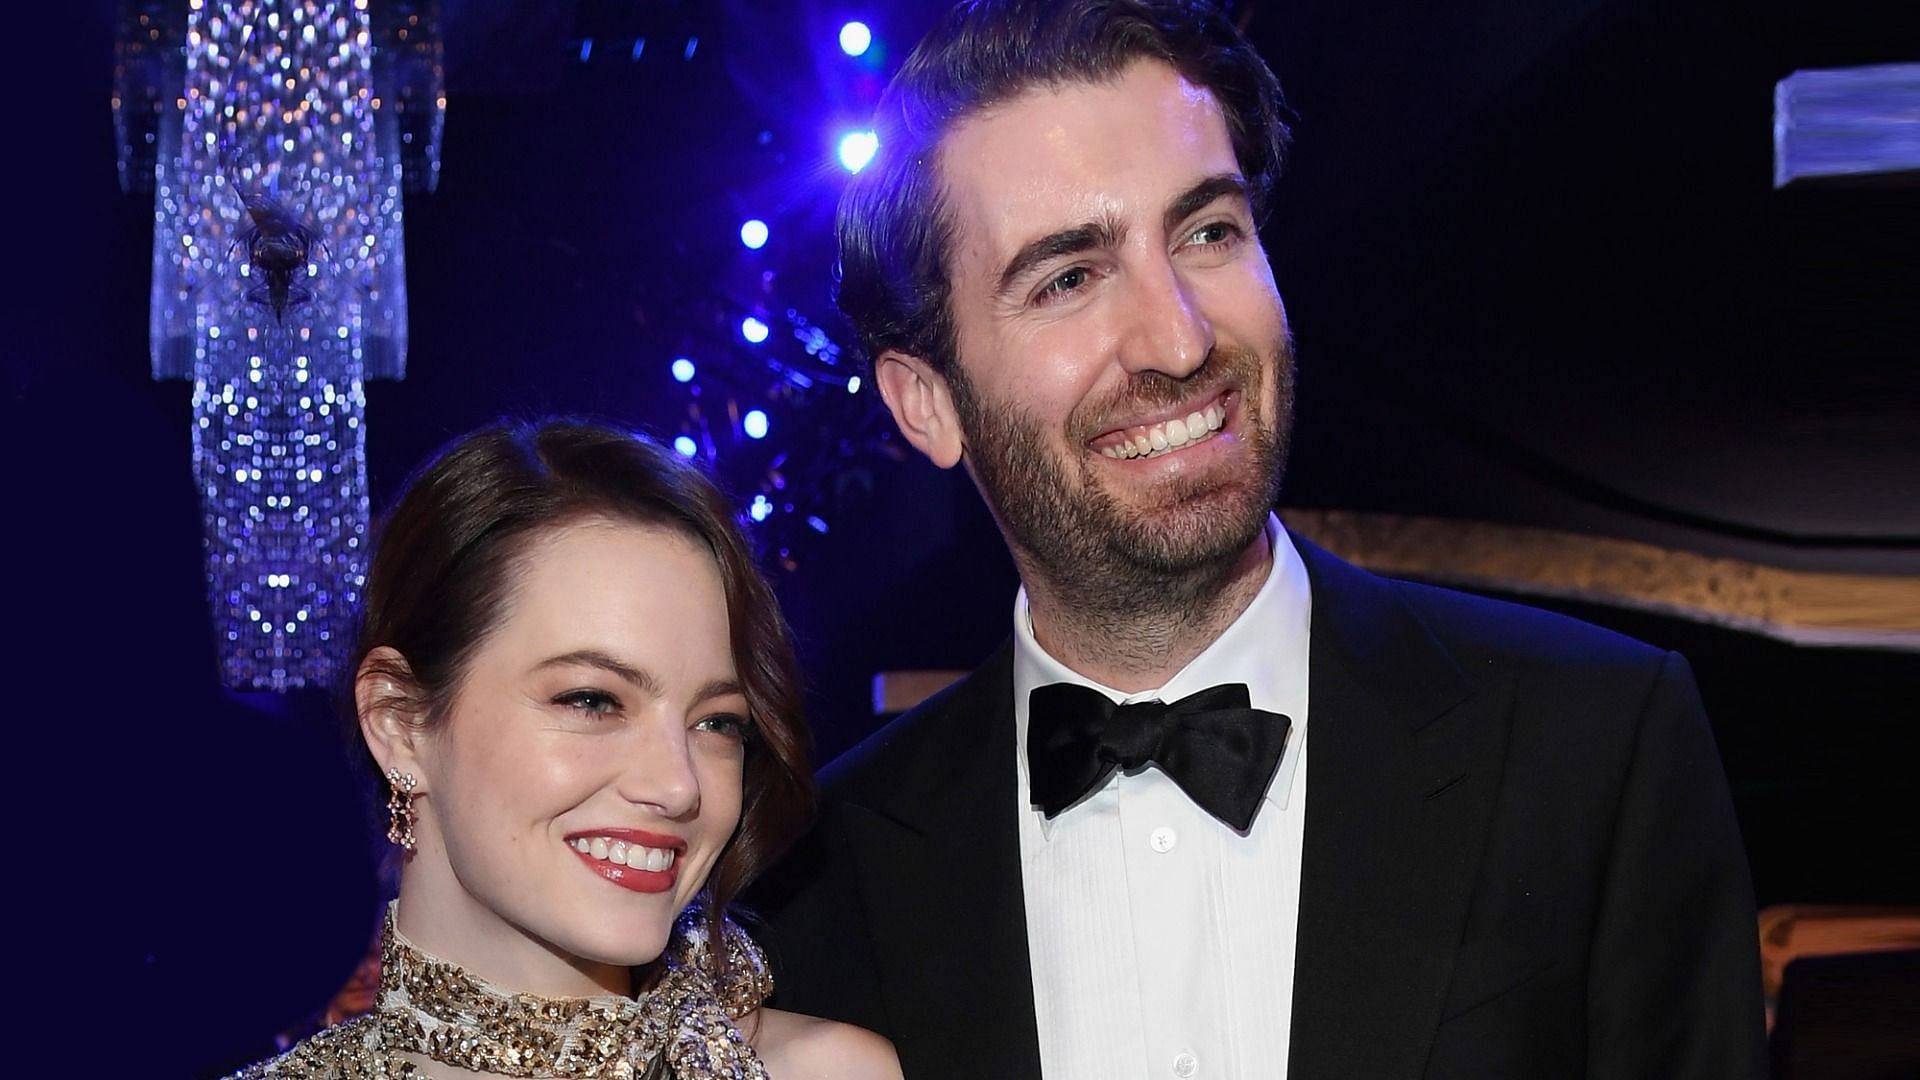 Stone and McCary are now parents of a baby girl (Image via Kevin Mazur/Getty Images)